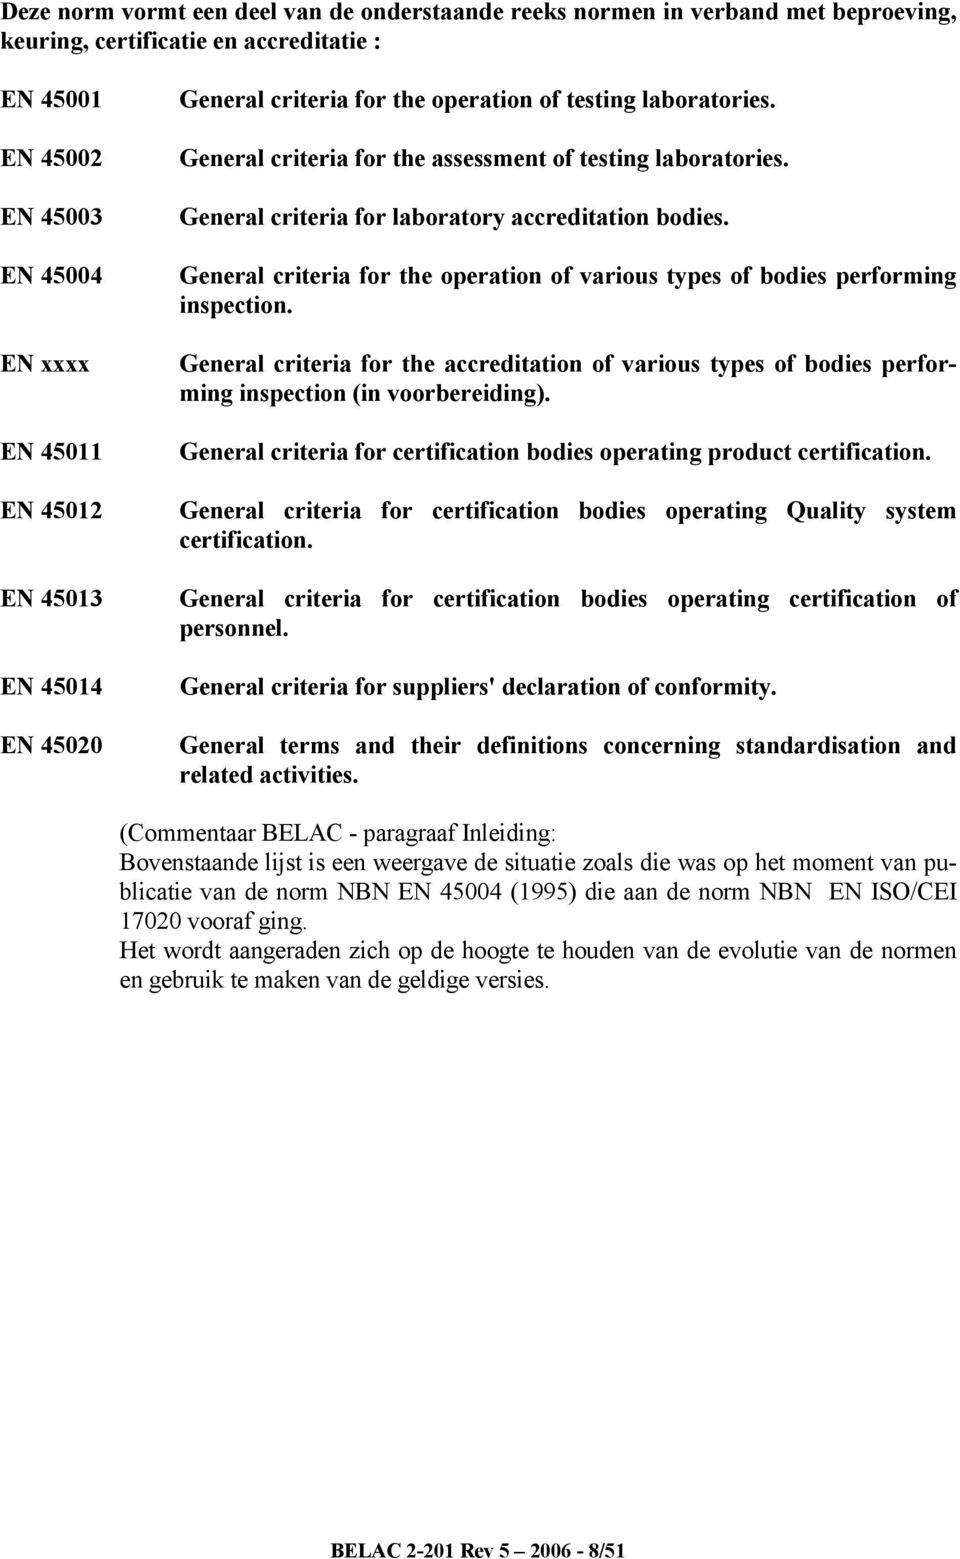 General criteria for the operation of various types of bodies performing inspection. General criteria for the accreditation of various types of bodies performing inspection (in voorbereiding).